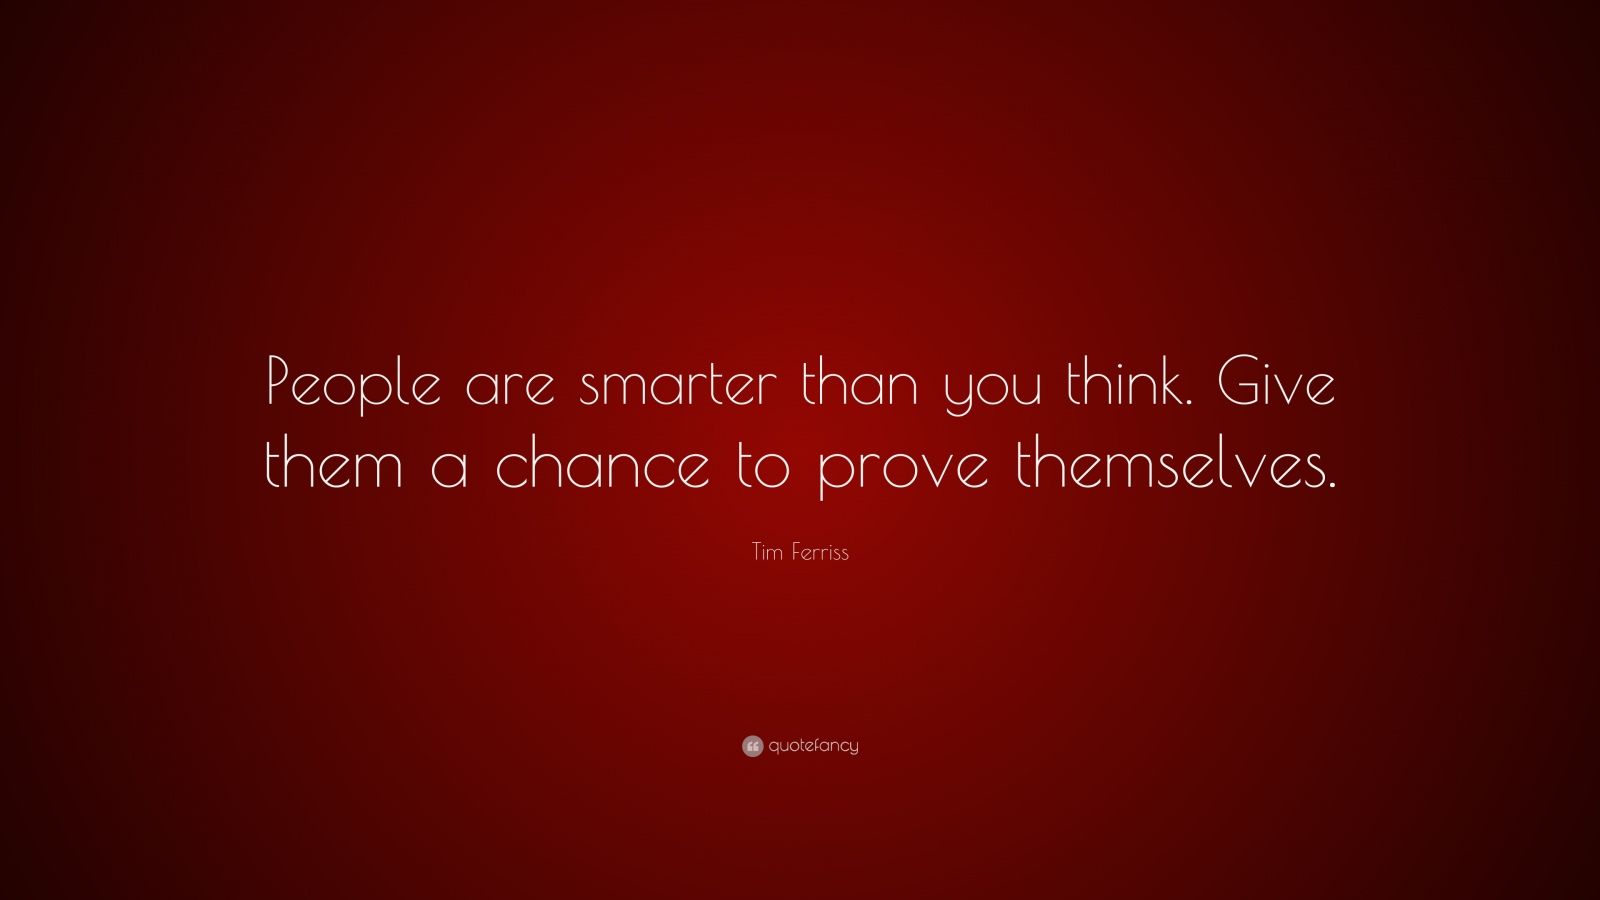 Tim Ferriss Quote: "People are smarter than you think ...